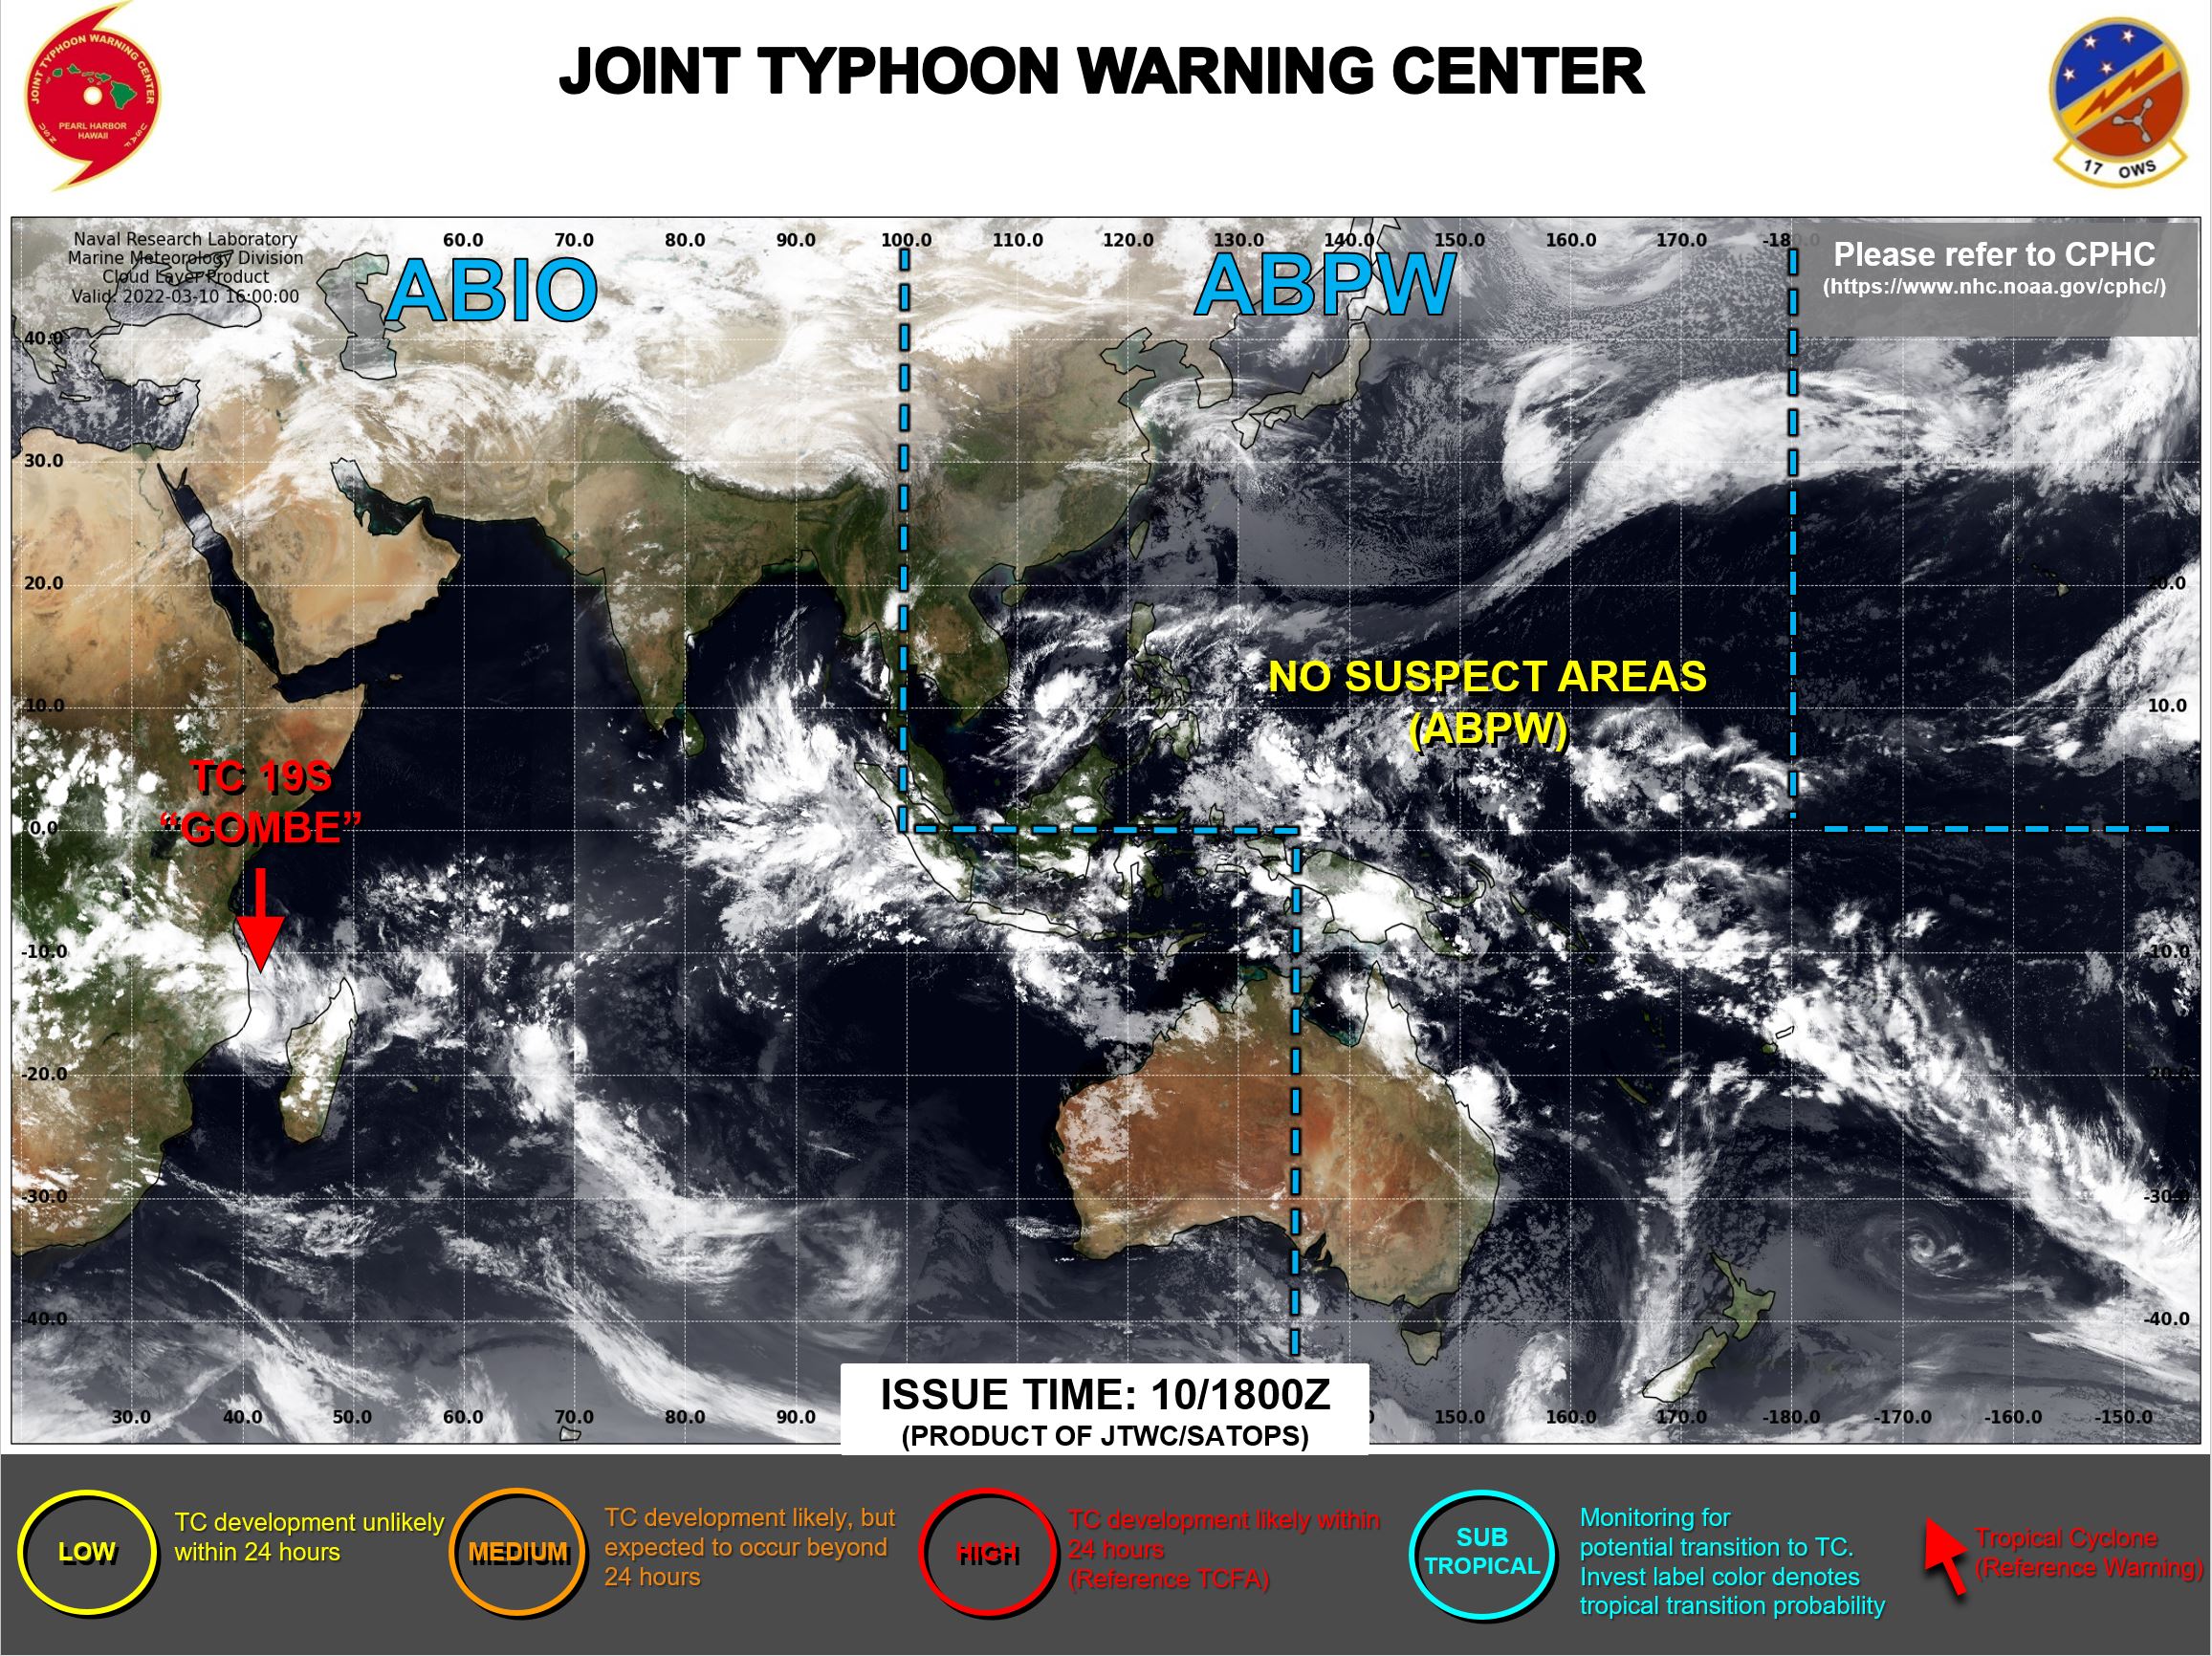 JTWC HAS BEEN ISSUING 6HOURLY WARNINGS AND 3HOURLY SATELLITE BULLETINS ON TC 19S(GOMBE).